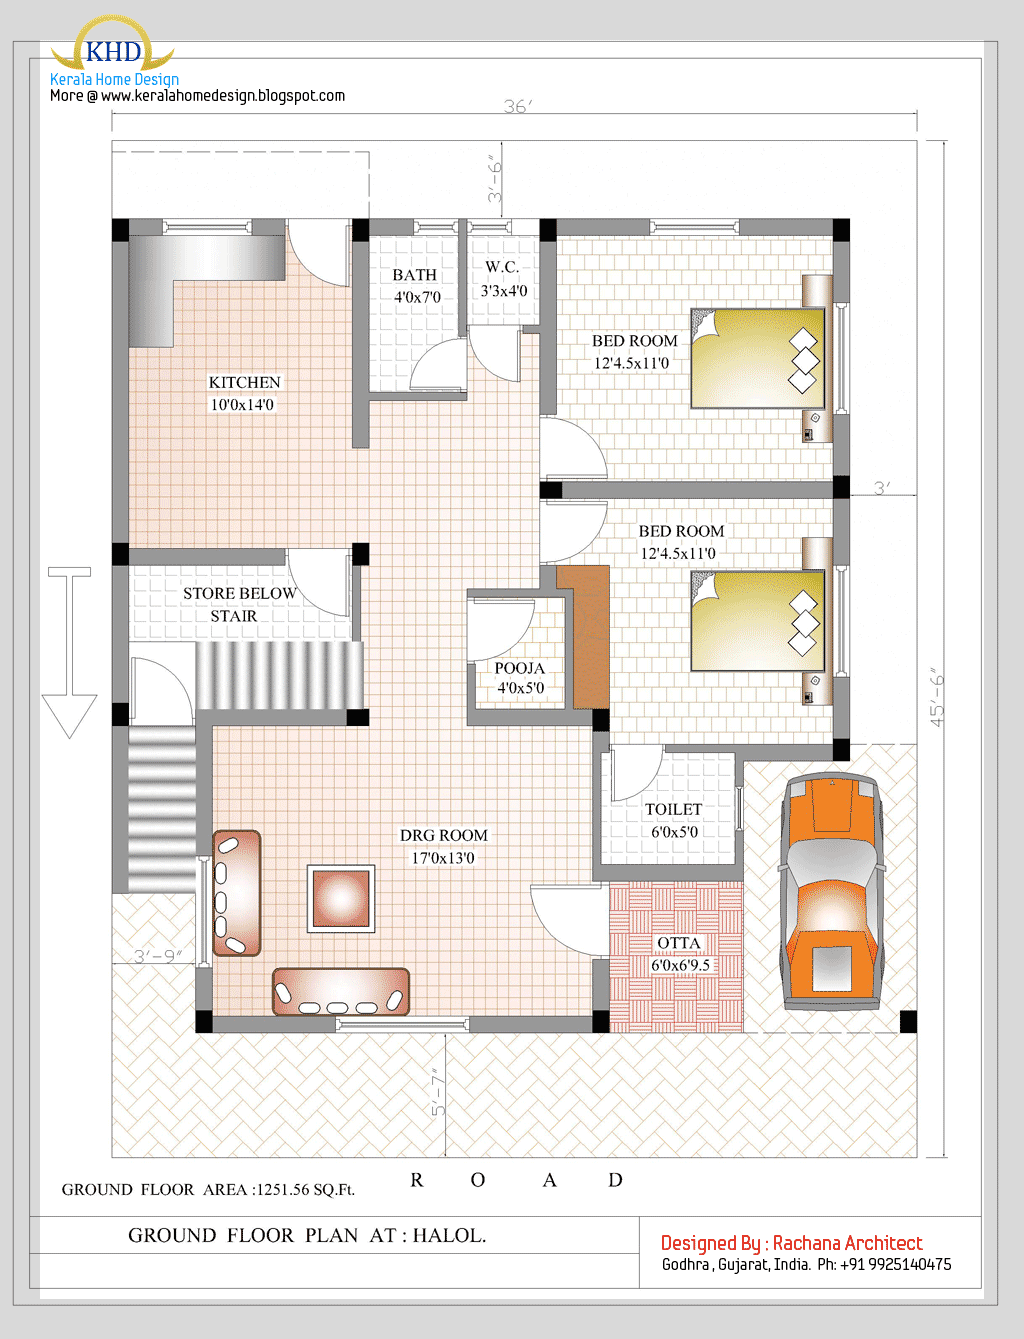  Duplex  House  Plan  and Elevation 2349 Sq  Ft  Kerala 